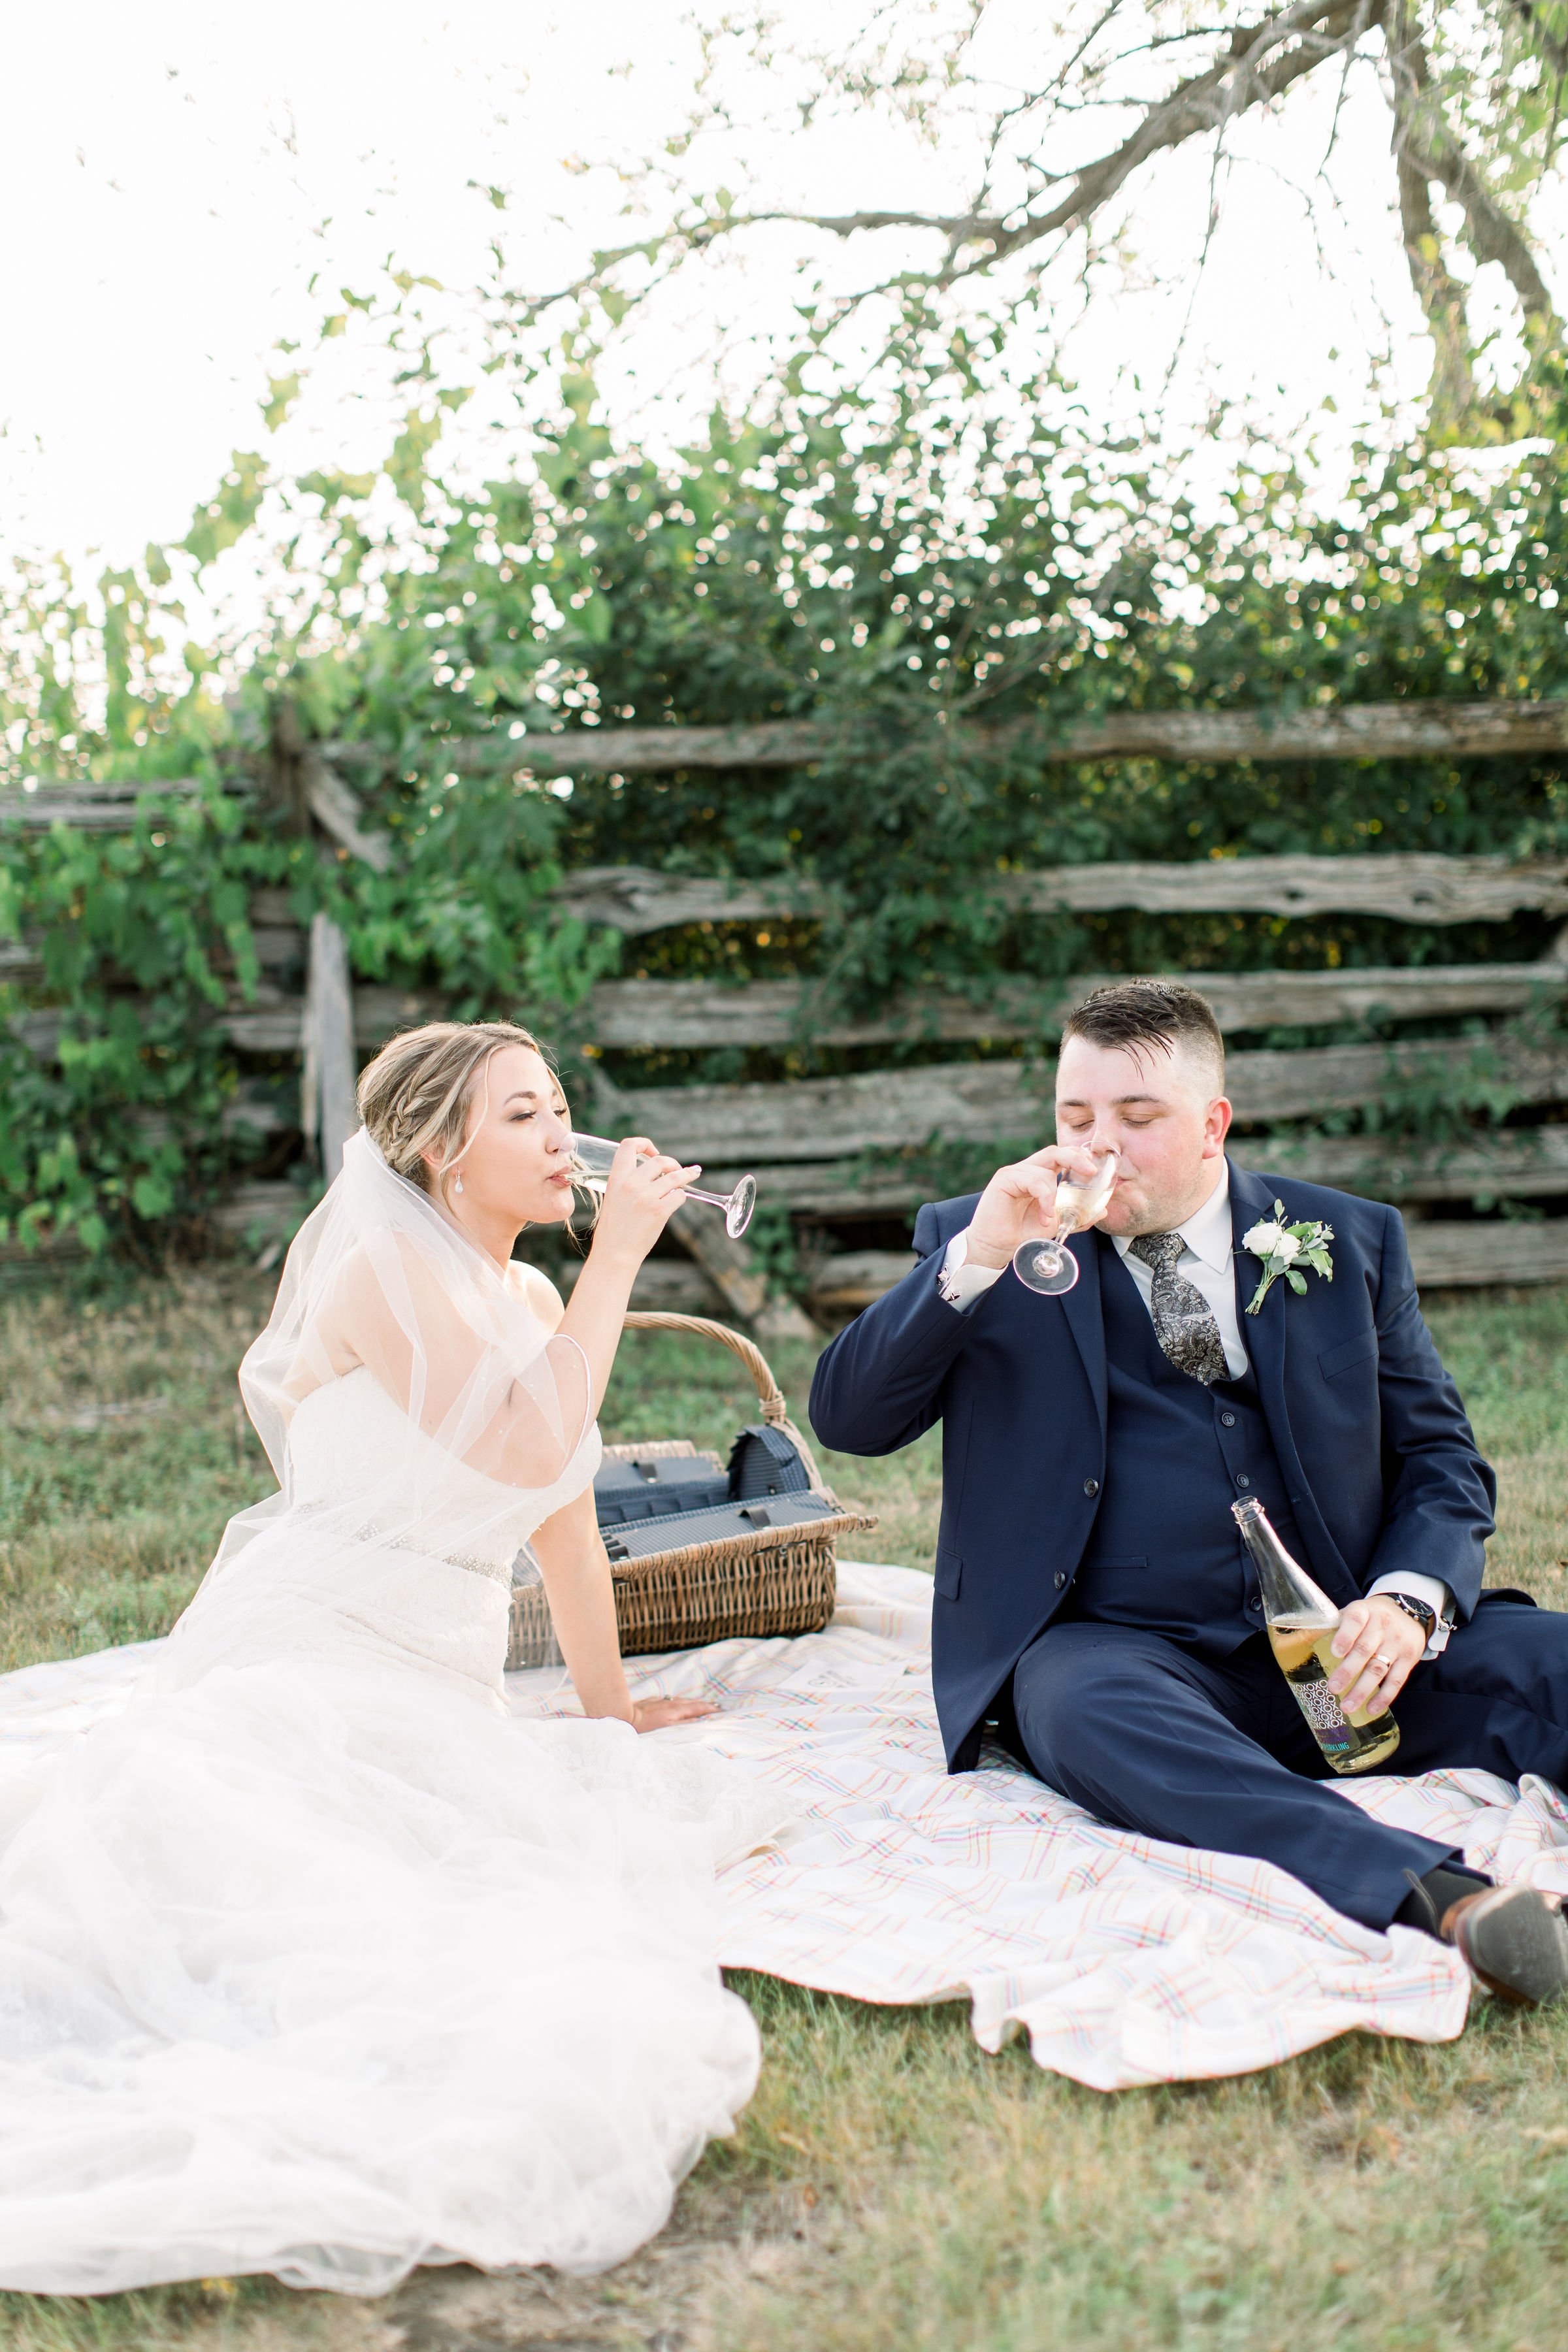  The bride and groom sit on a picnic blanket and toast on their wedding day by Chelsea Mason Photography. picnic wedding celebration #StonefieldEstates #Ontarioweddings #Chelseamasonphotography #Chelseamasonengagements #Ontarioweddingphotographers 